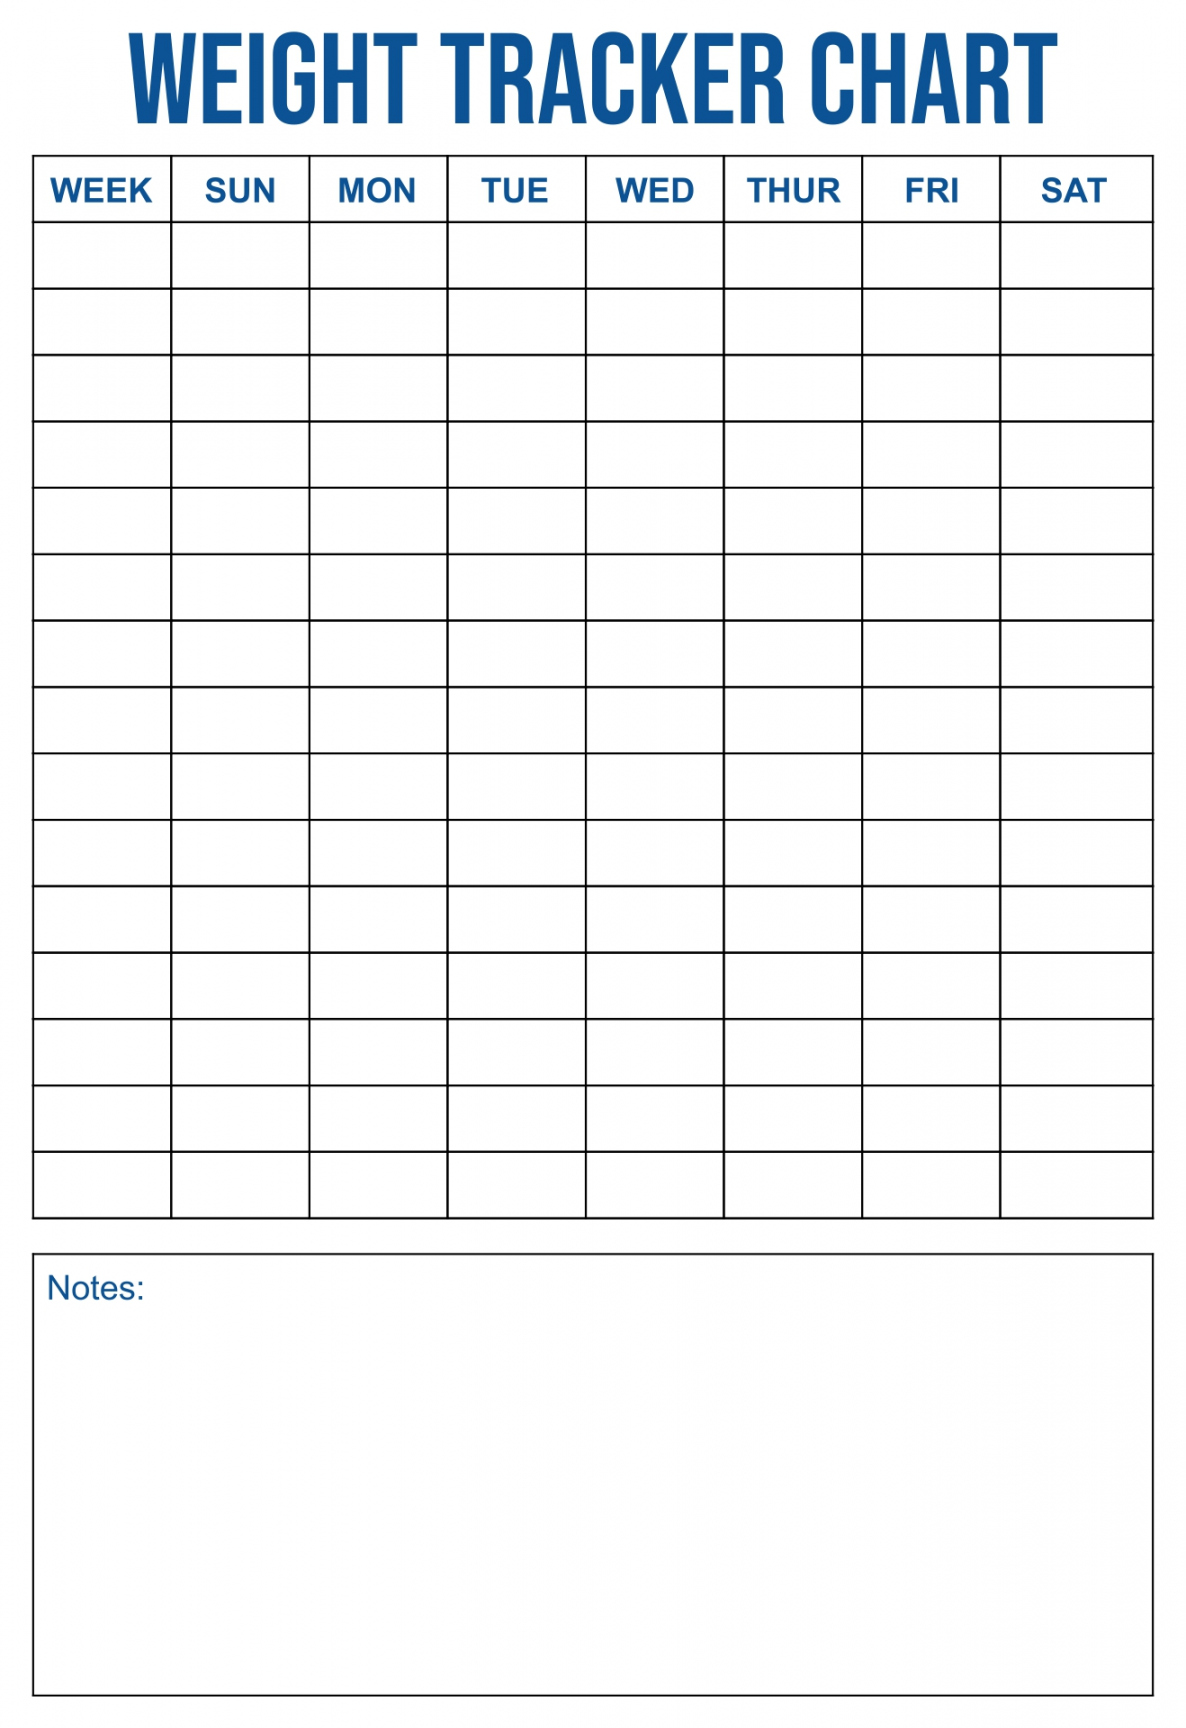 Best Free Printable Weight Loss Tracker - printablee - Free Weight Loss Chart Printable